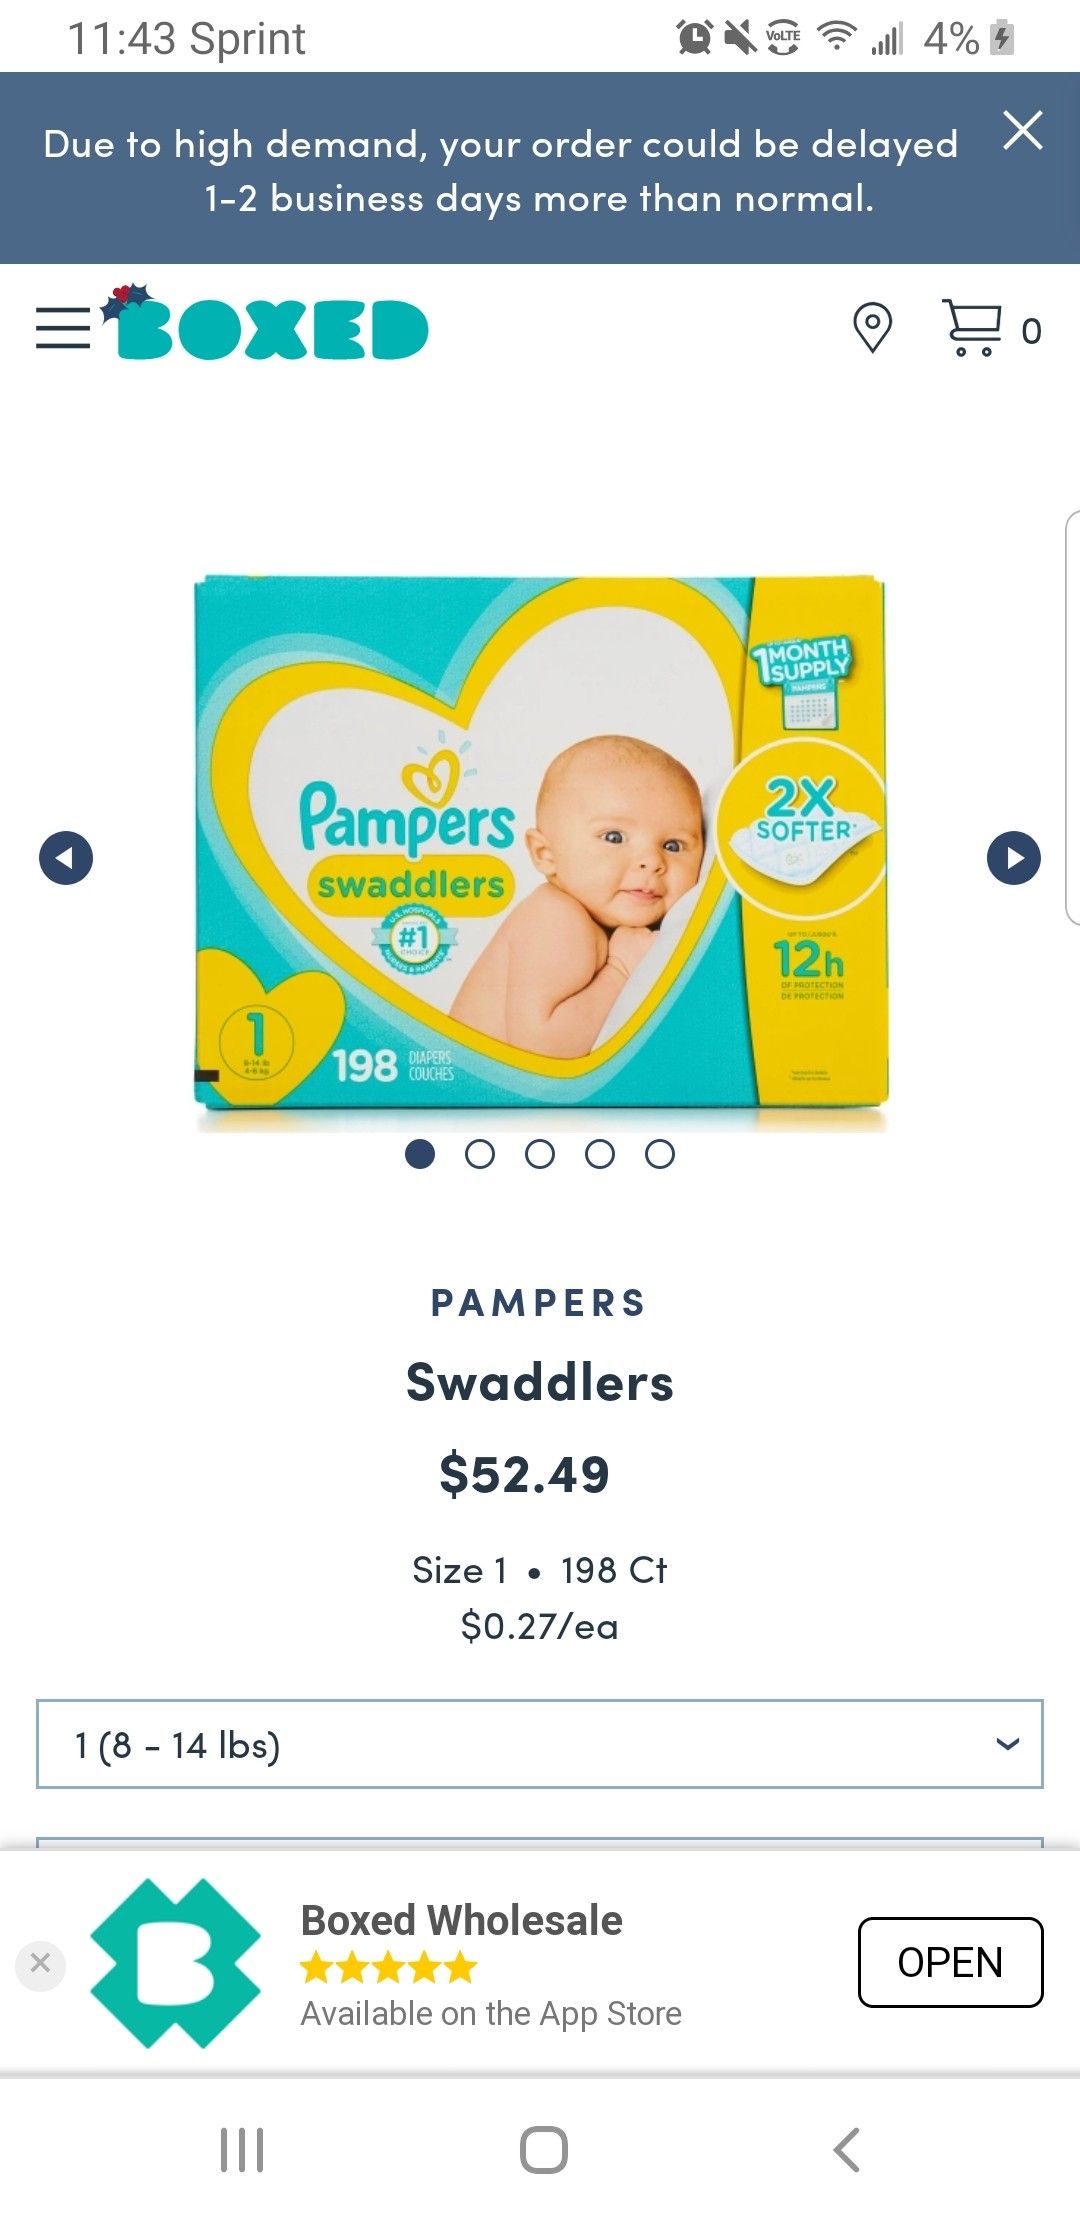 Pampers Swaddlers Diapers size 1 198 count